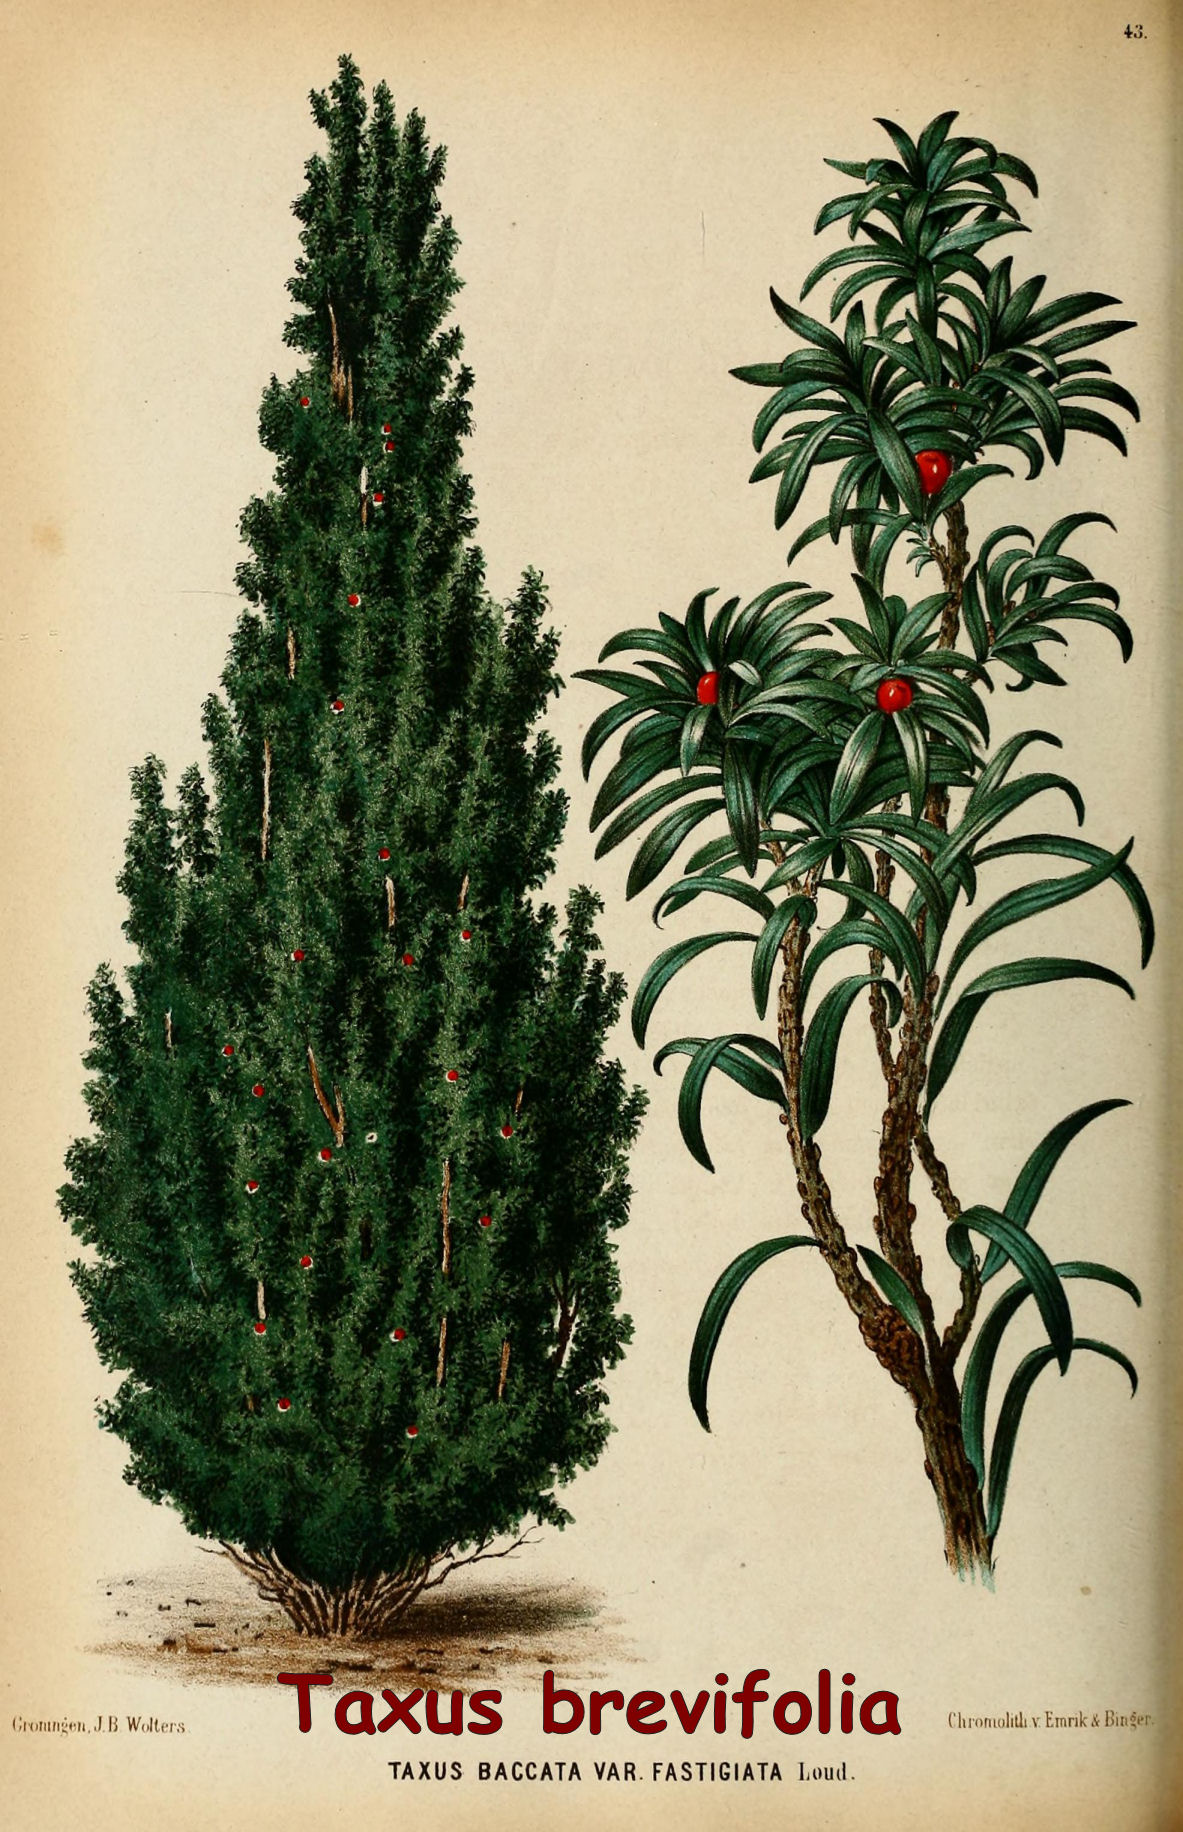 Taxus brevifolia - Pacific Yew tree